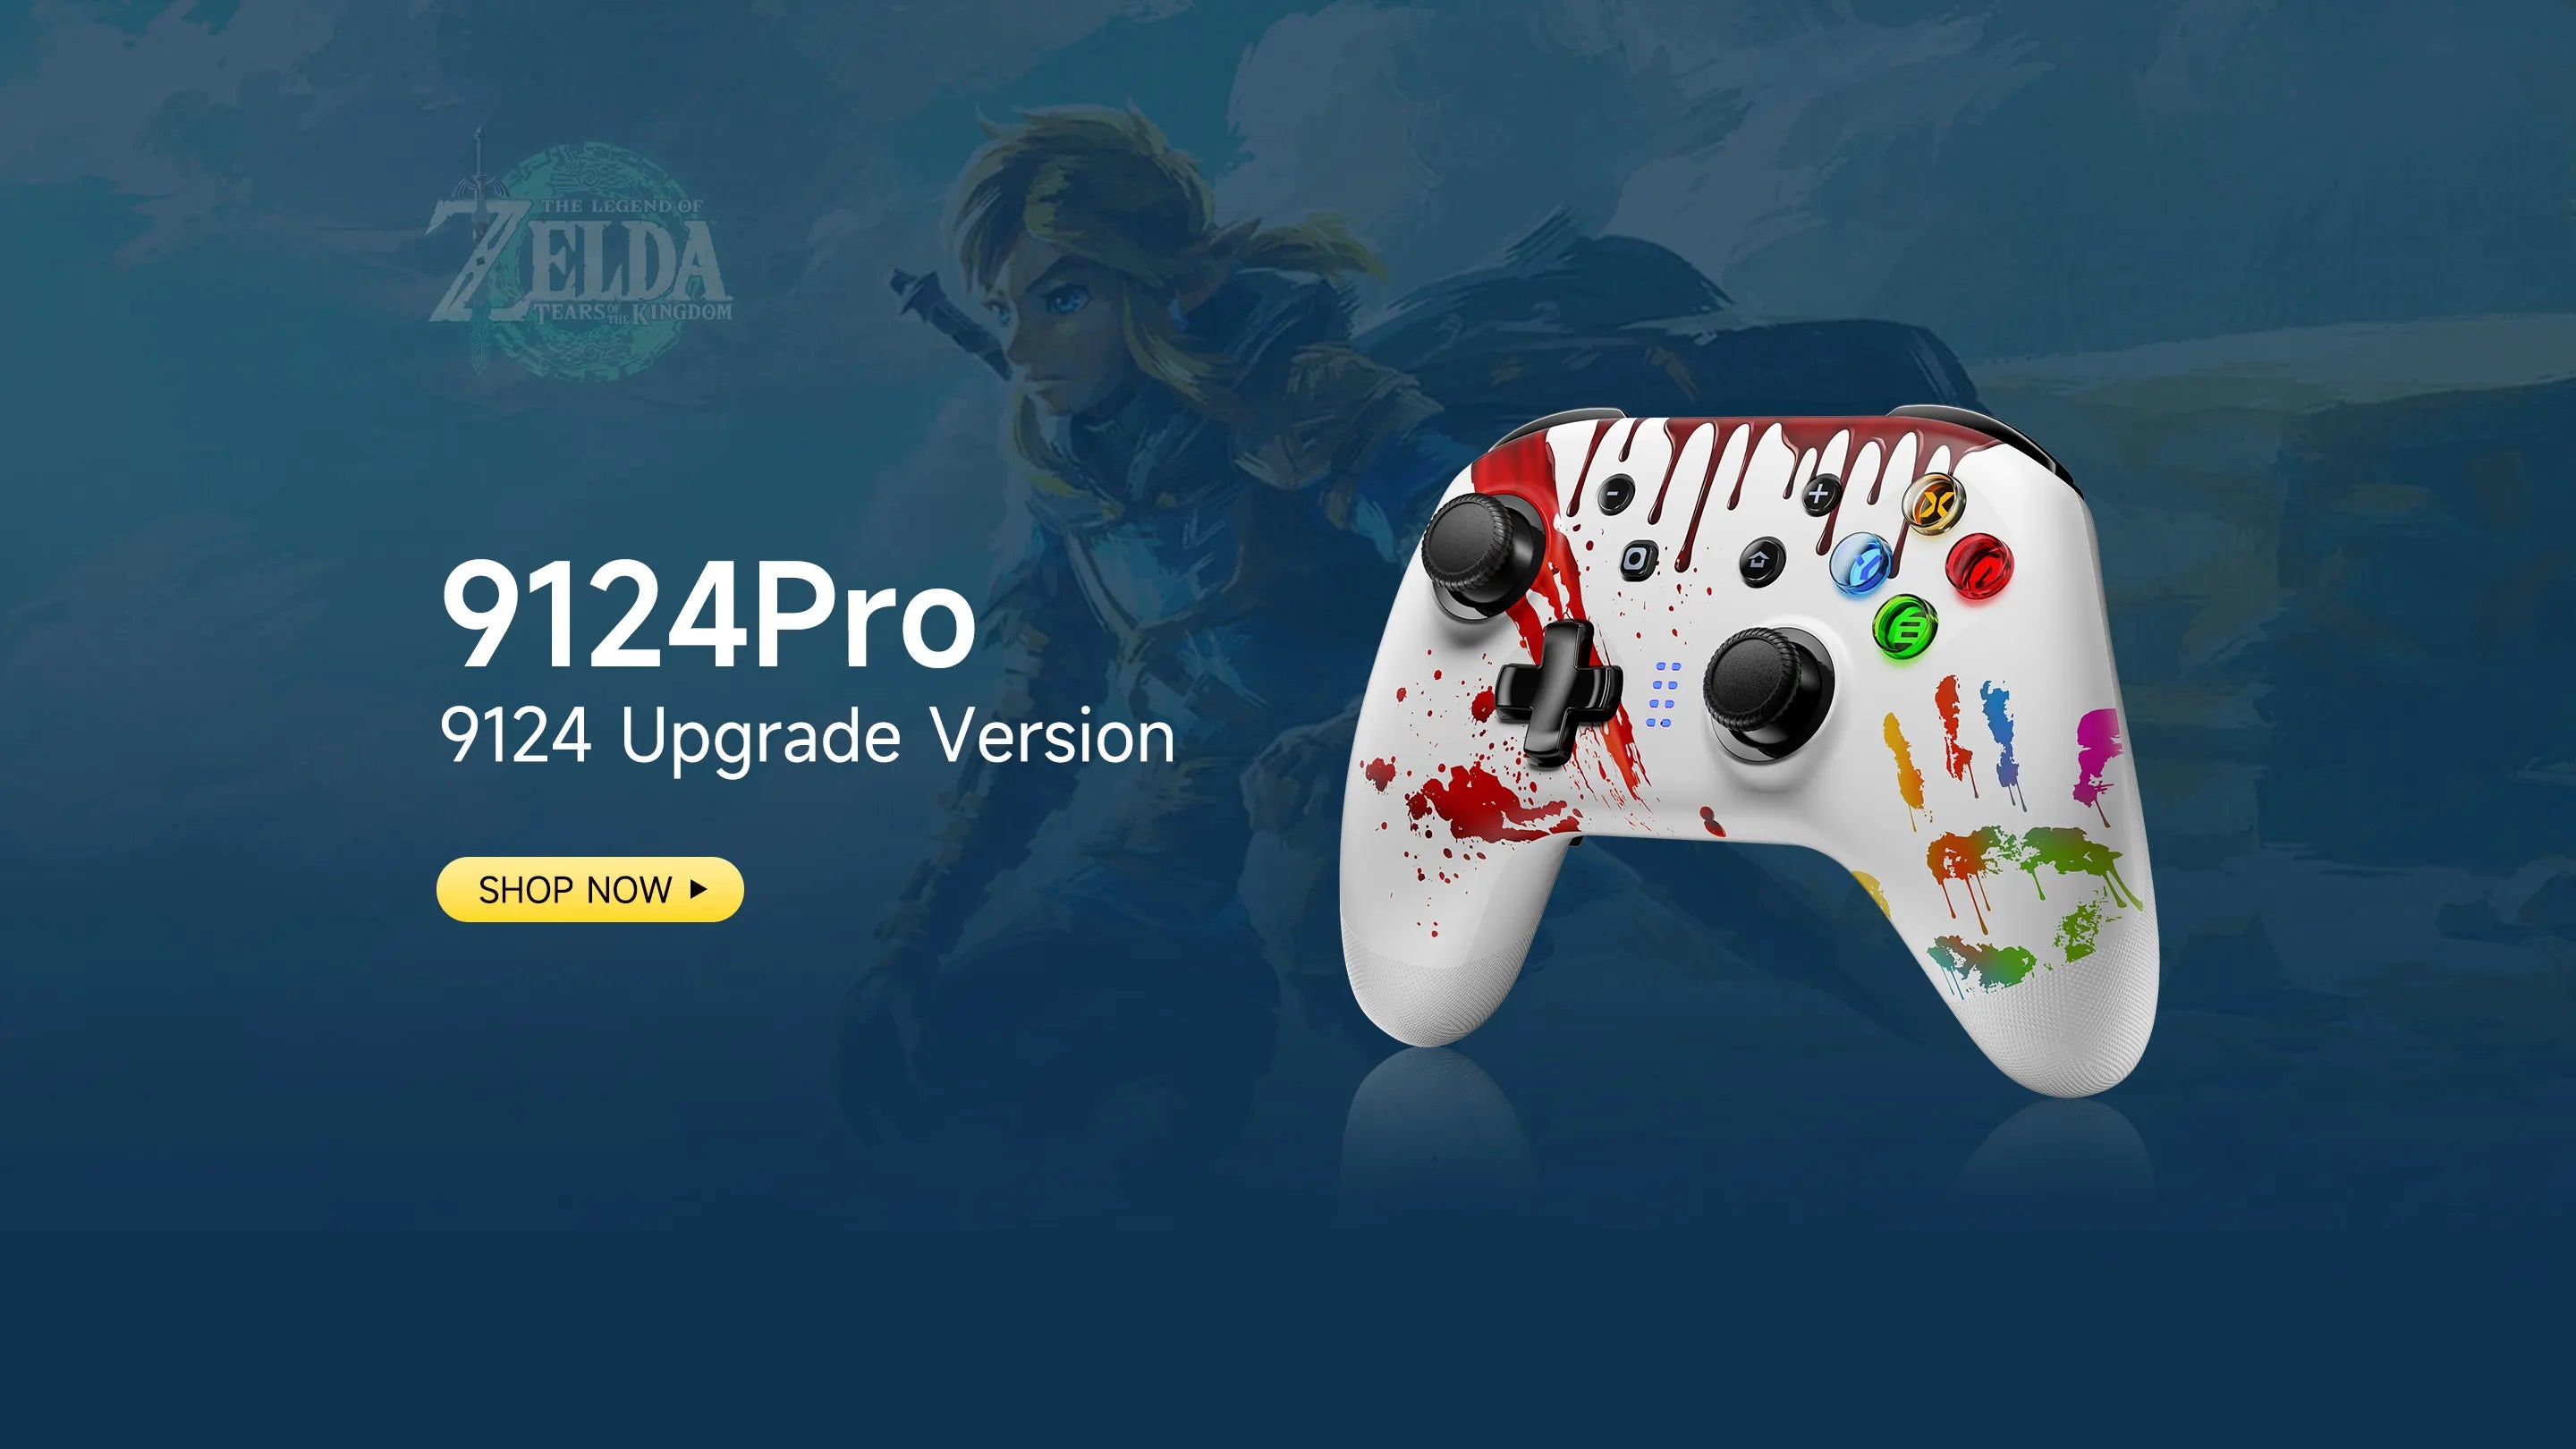 What is the best game controller for Zelda:Tears of The Kingdom? - EasySMX 9124 Pro